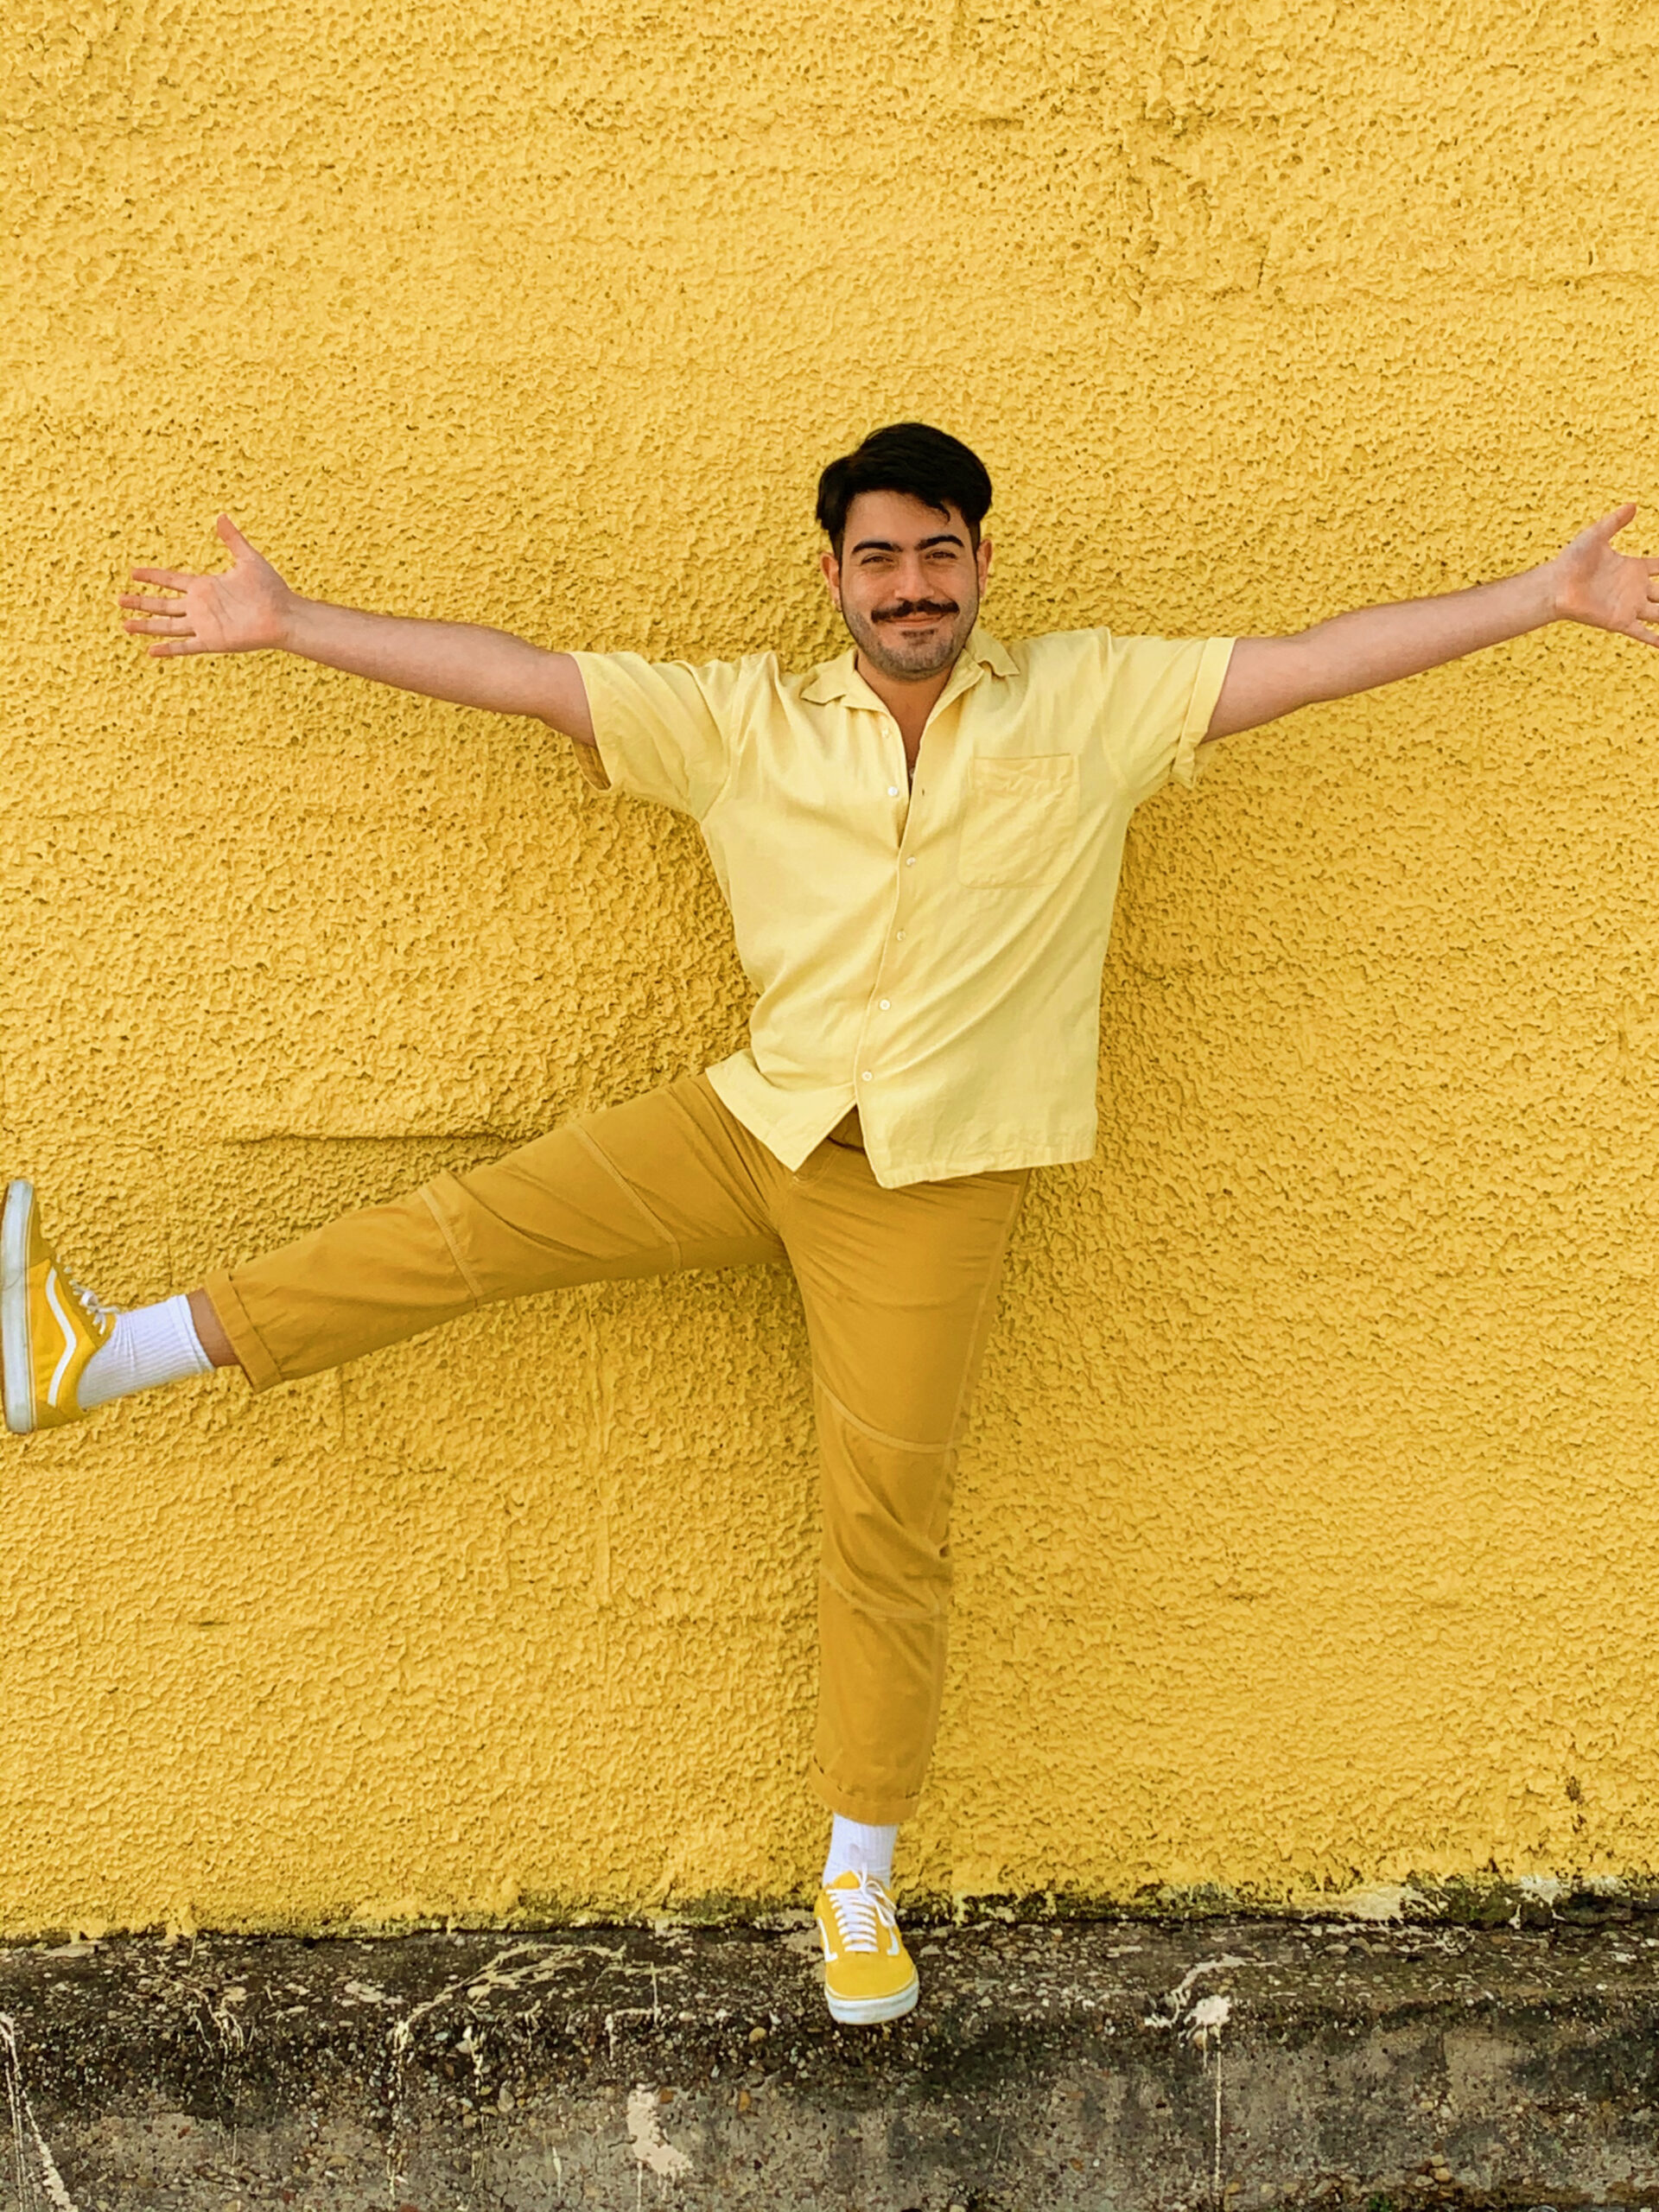 Buffalo Exchange employee posing in front of a yellow wall wearing a head to toe yellow outfit